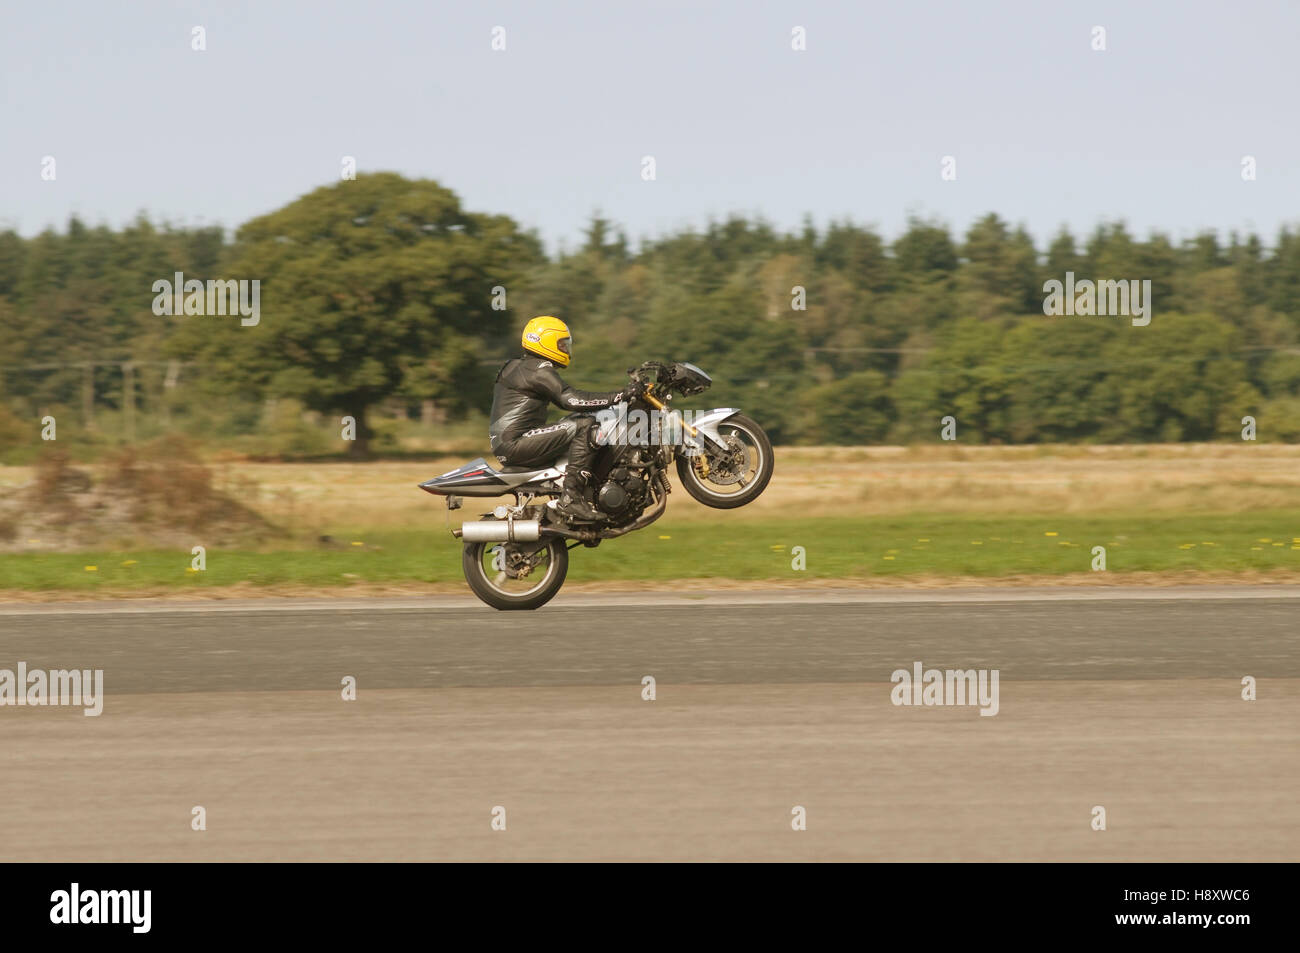 motorcycle pulling a wheelie Stock Photo